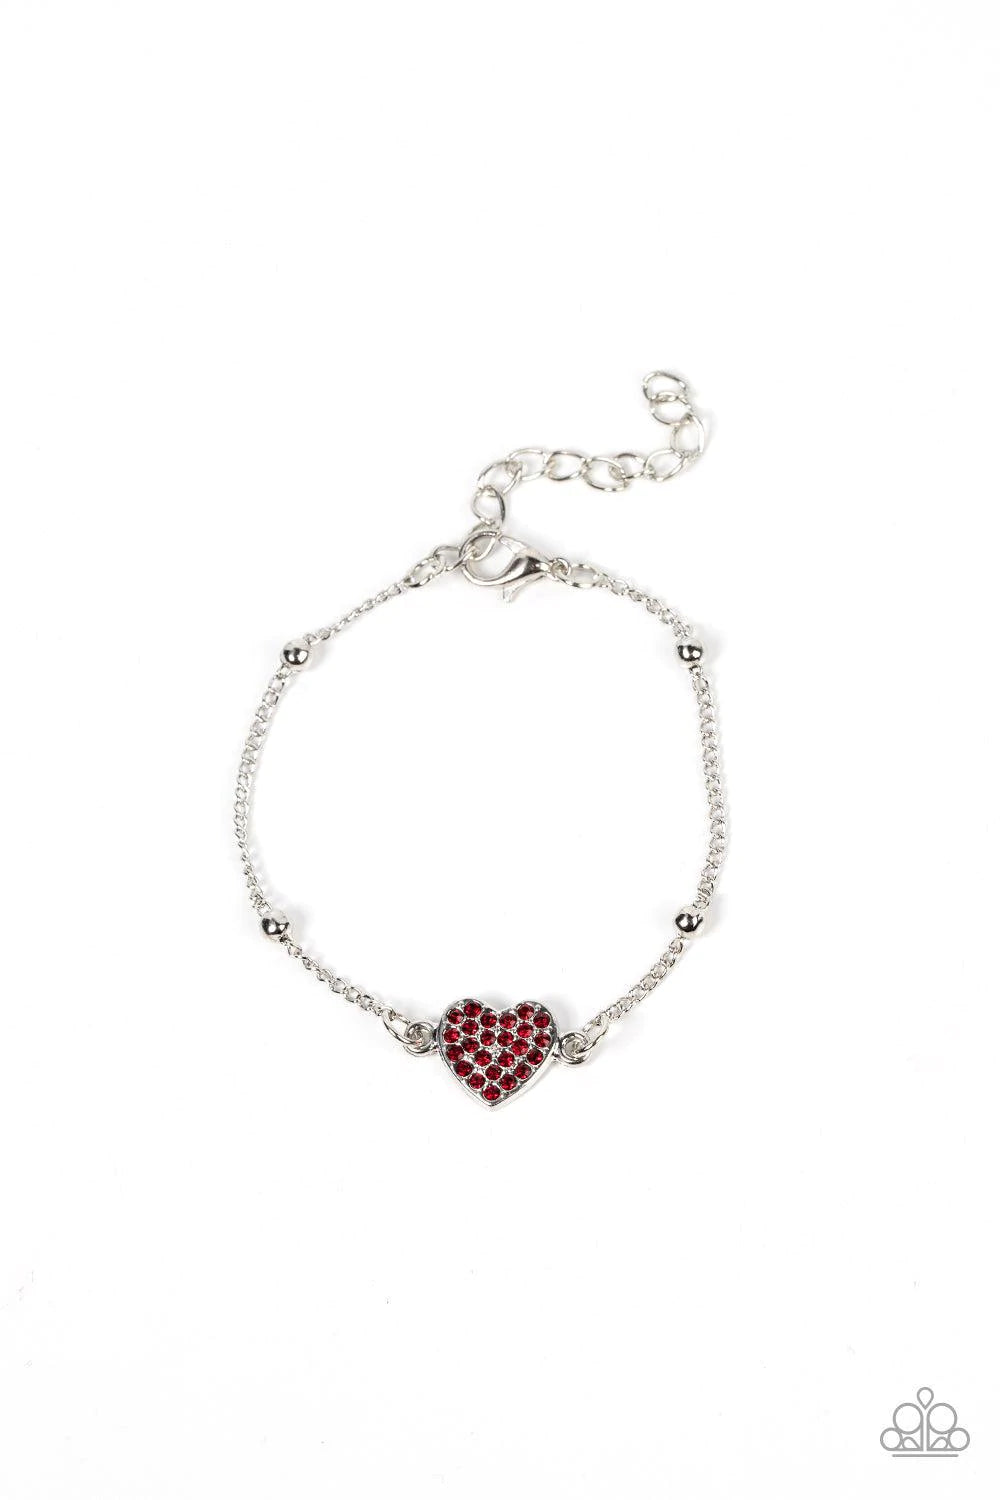 Paparazzi Accessories Heartachingly Adorable - Red A red rhinestone dotted silver heart charm adorns a silver beaded chain, creating a romantic centerpiece. Features an adjustable clasp closure. Sold as one individual bracelet. Jewelry